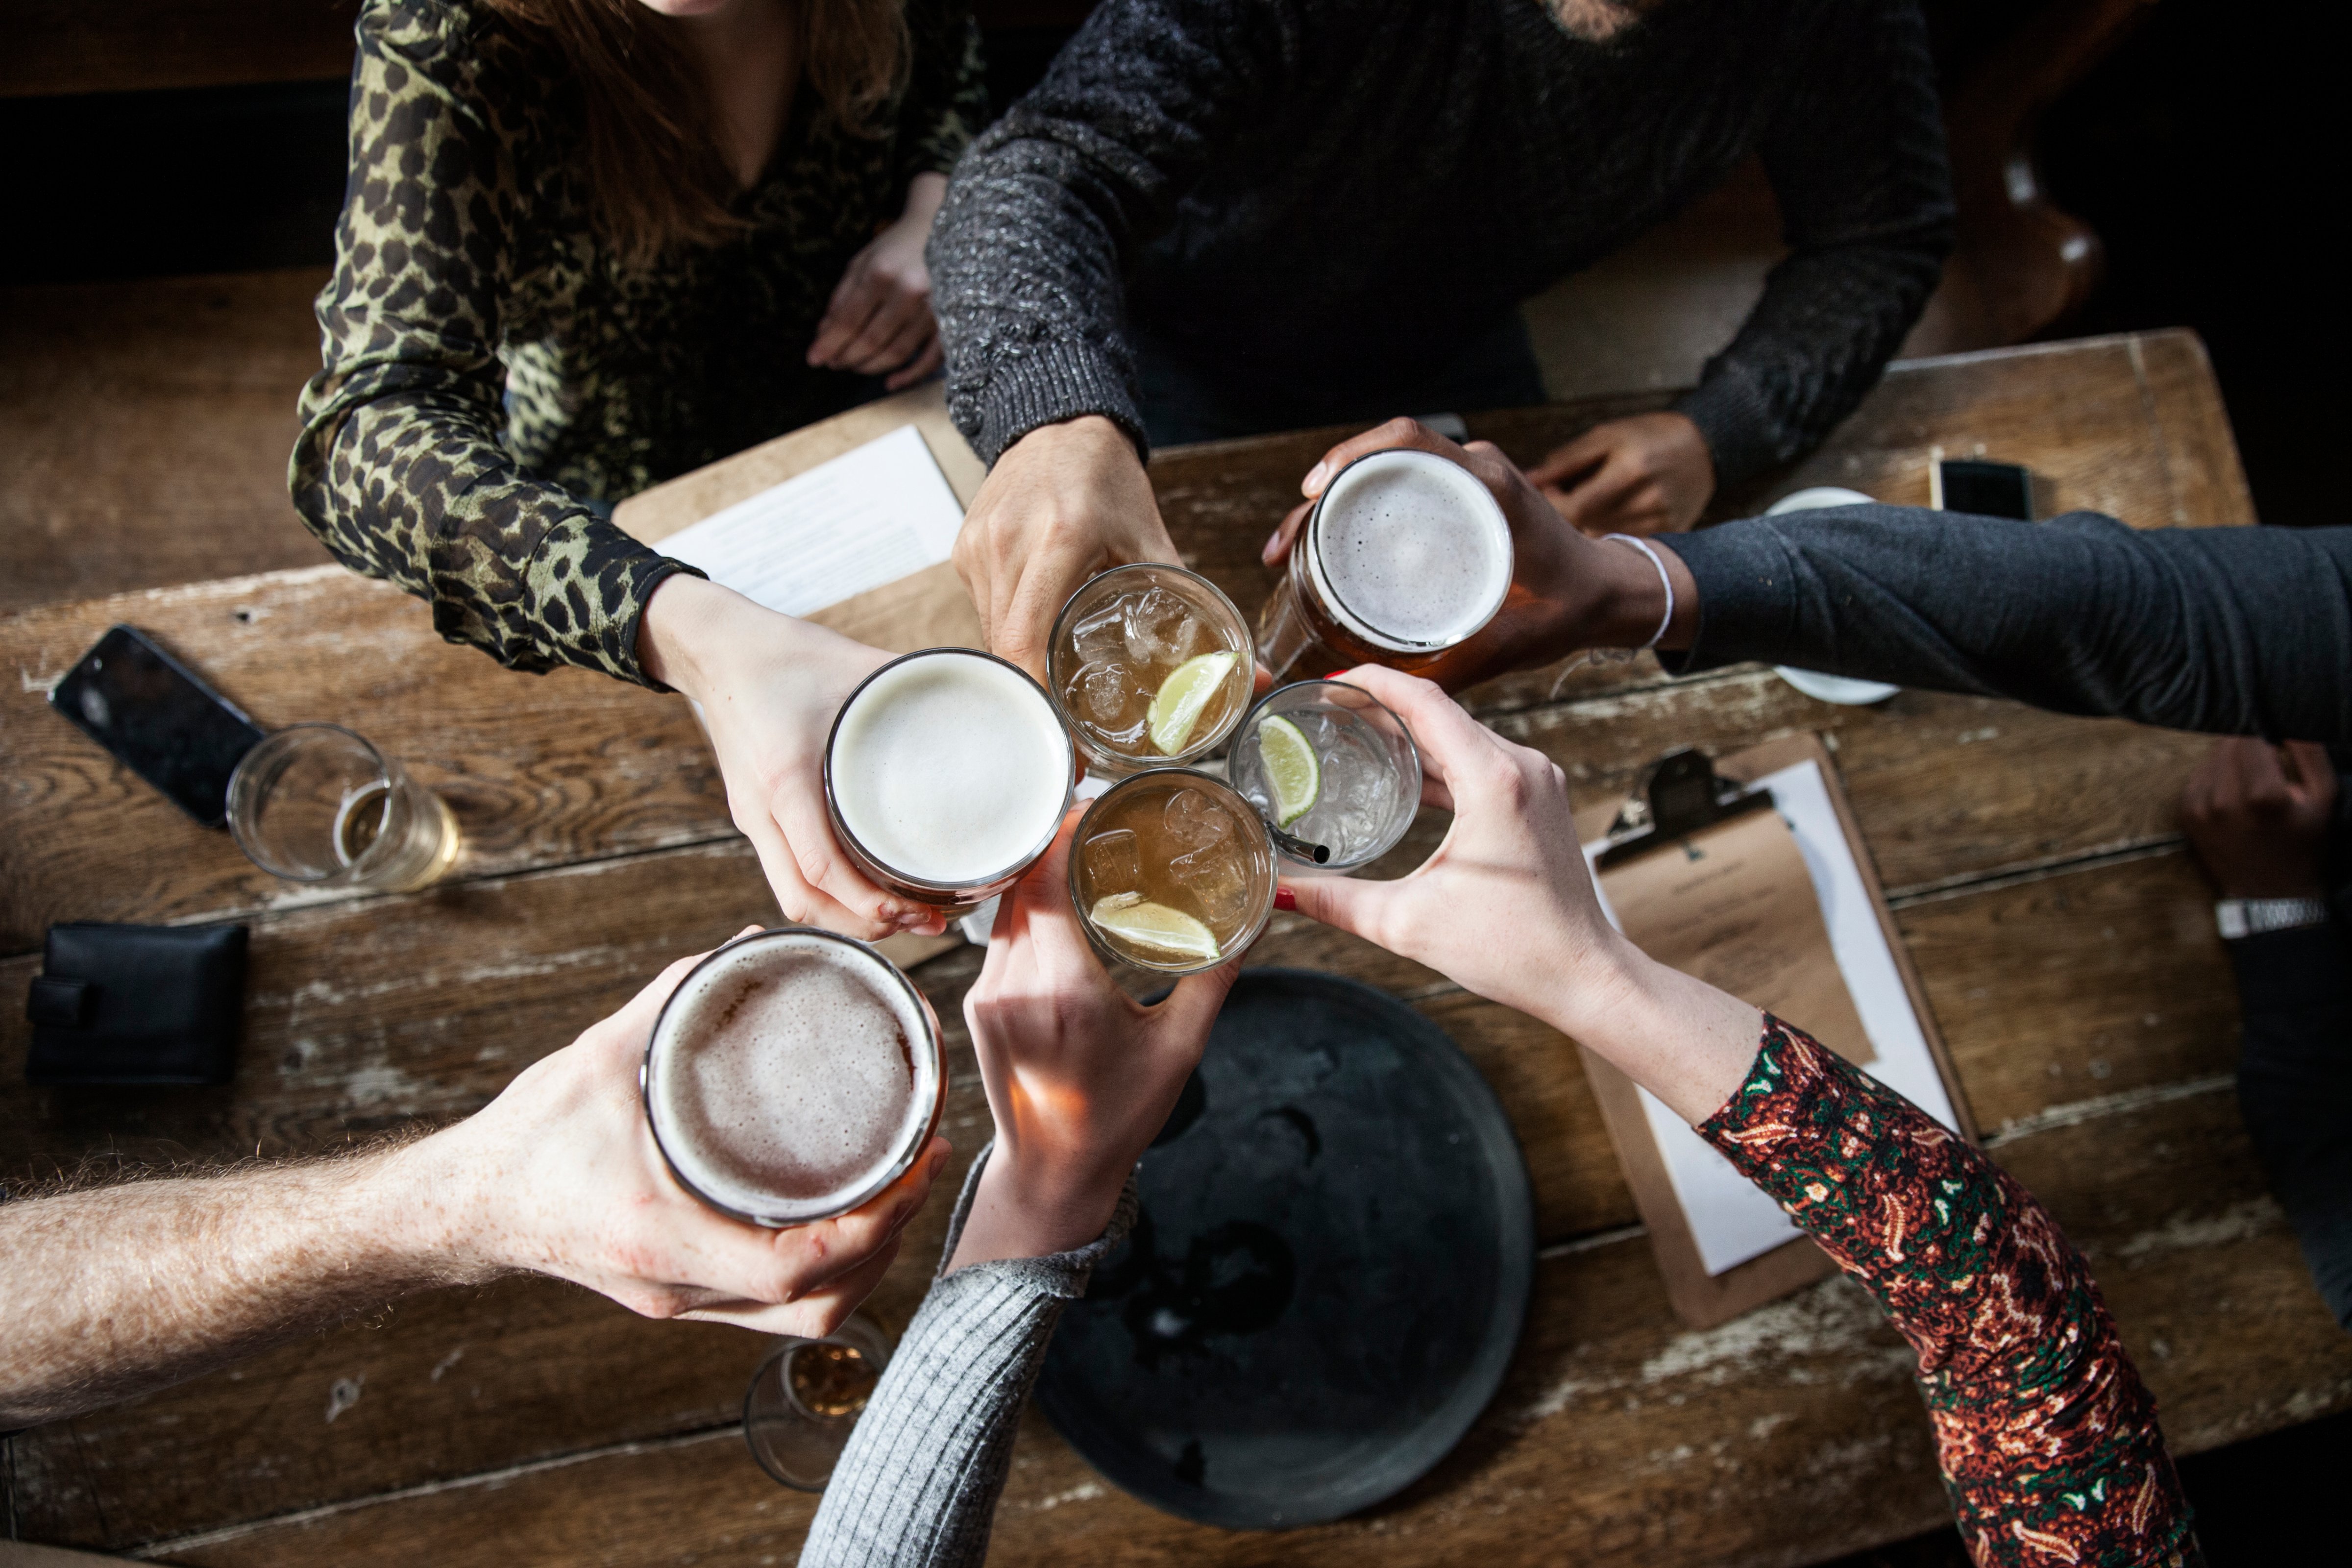 Stock photo of friends toasting at a pub (Henrik Sorensen—Getty Images)